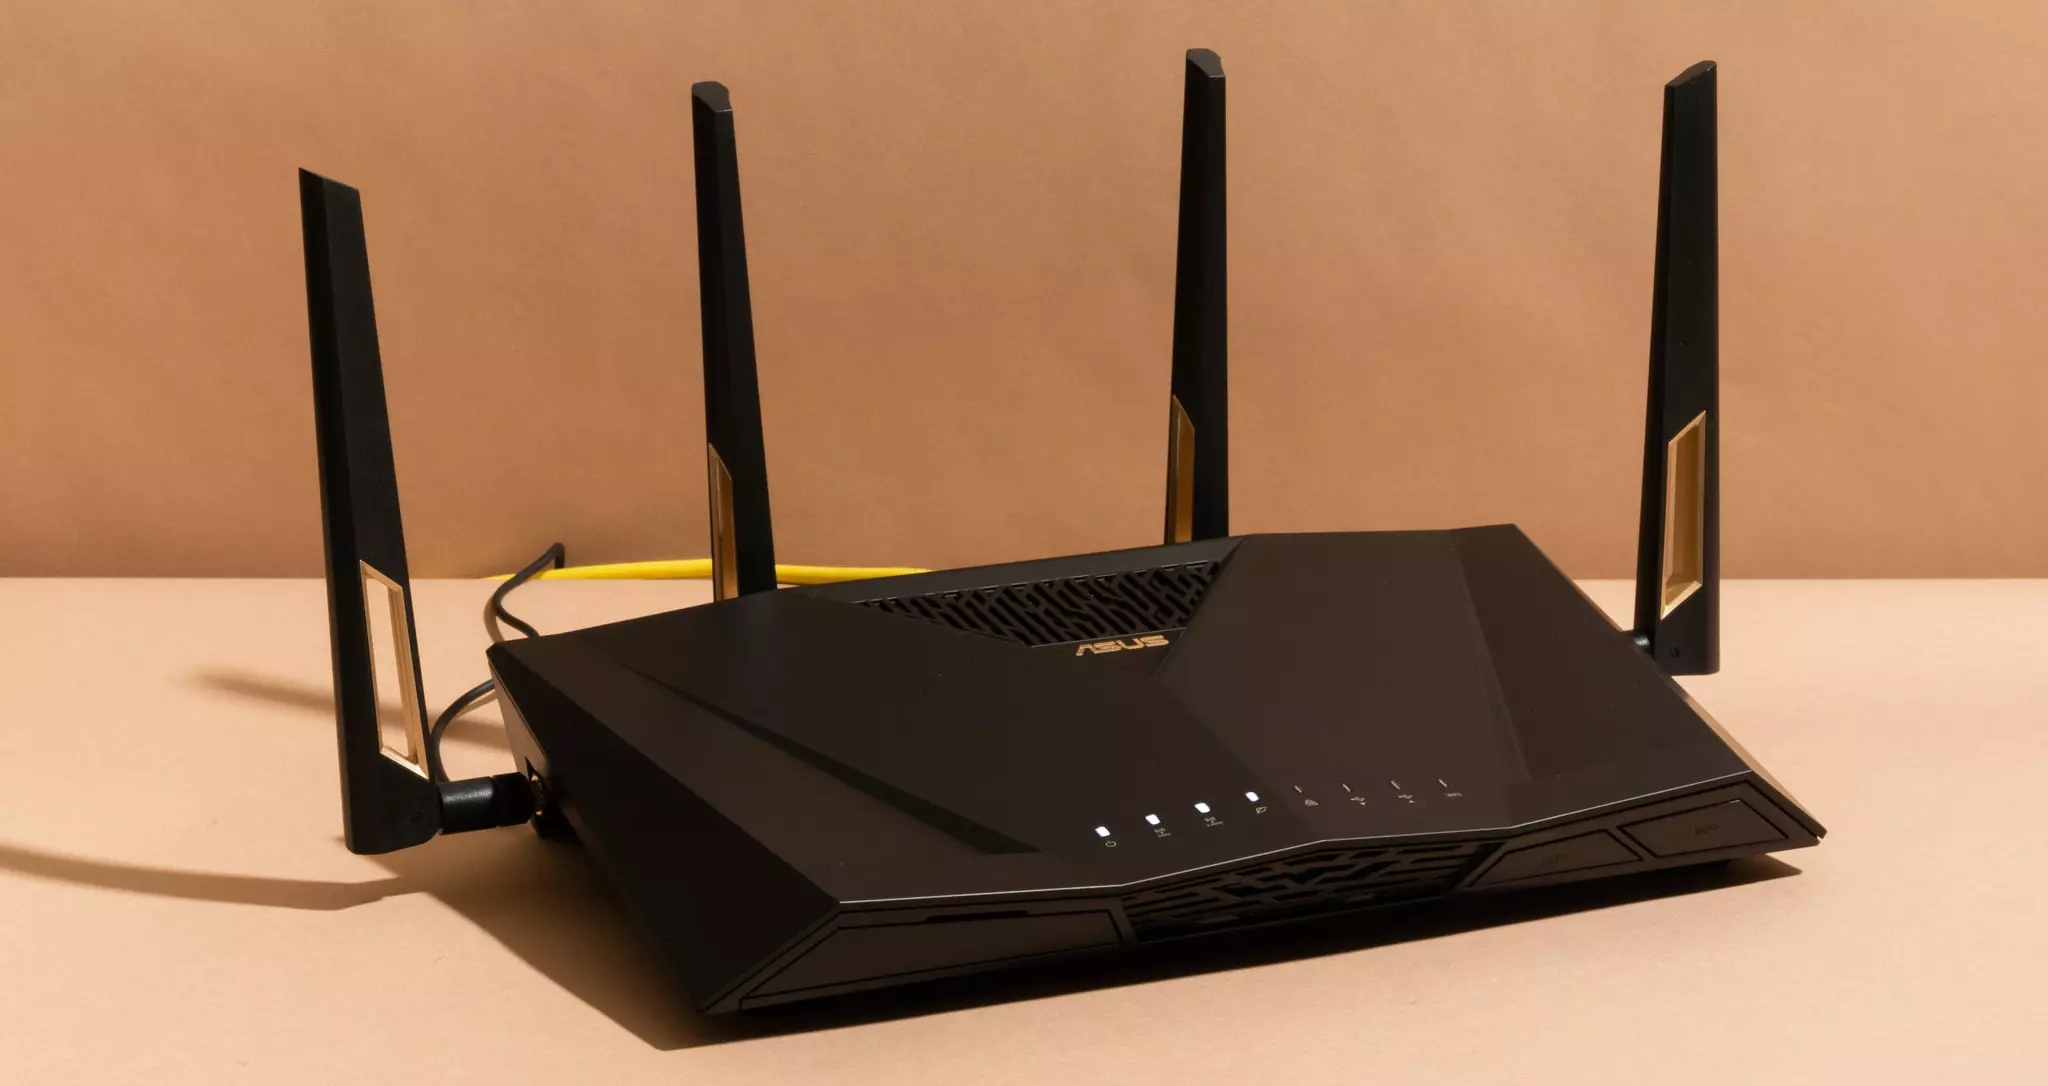 wi-fi router